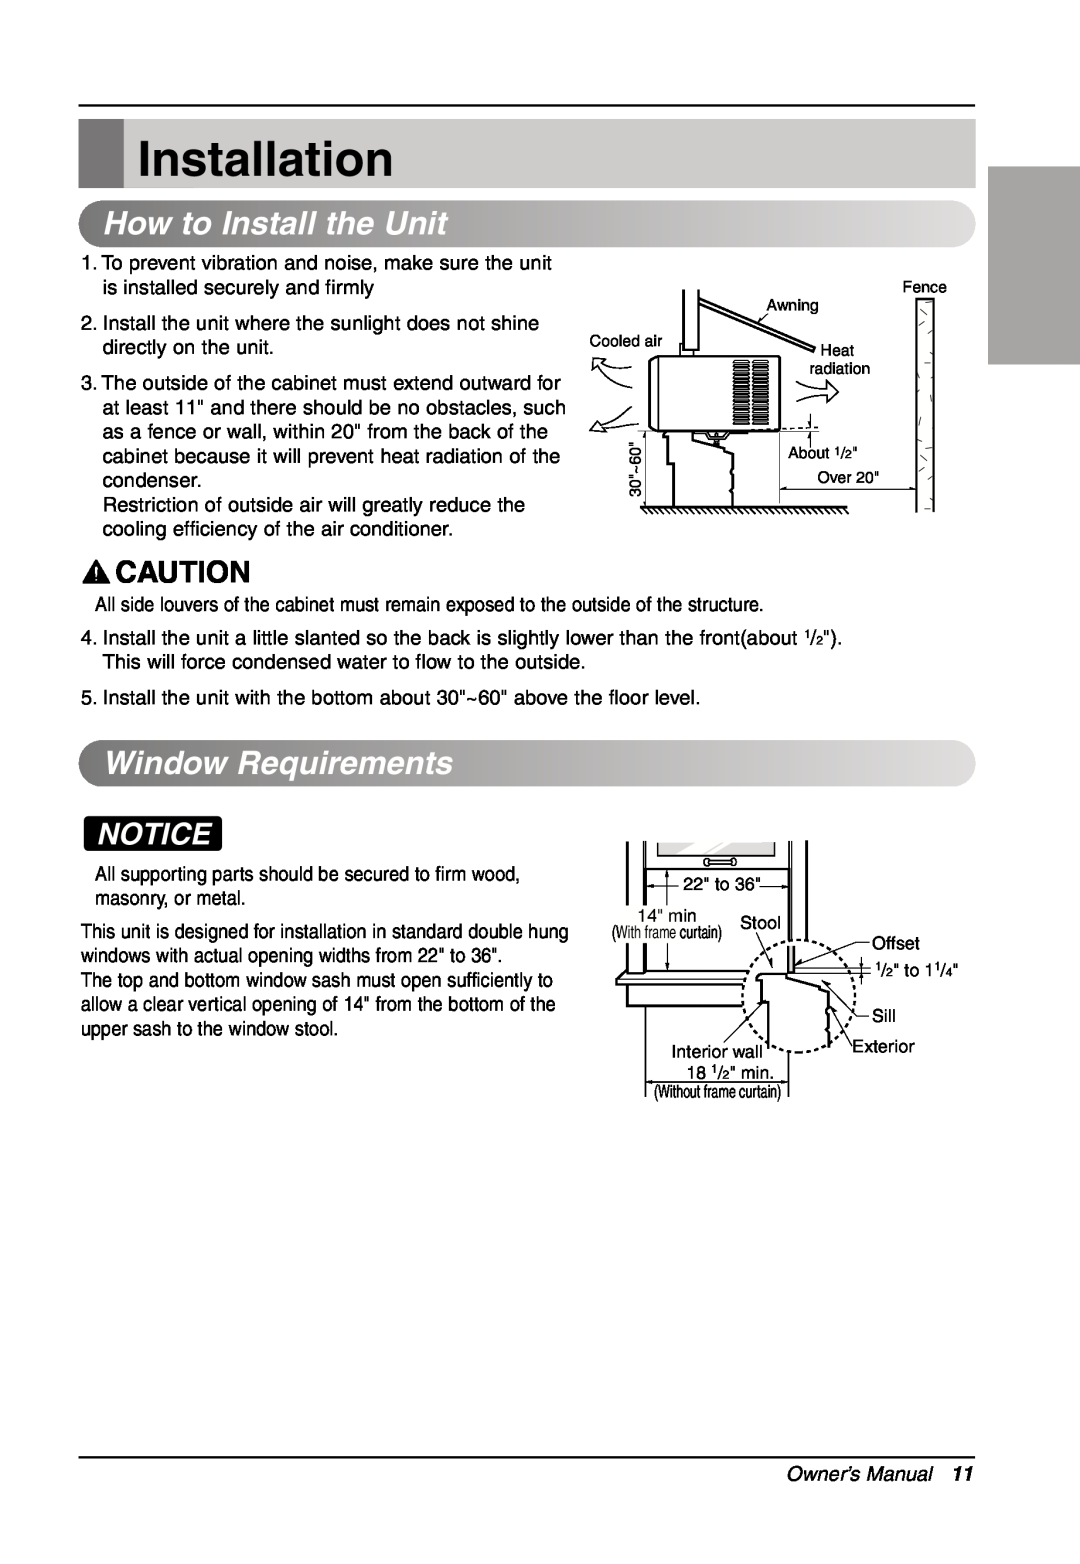 LG Electronics LW701 HR owner manual Installation, HowtoInstalltheUnit, WindowRequirements, Owner’s Manual 